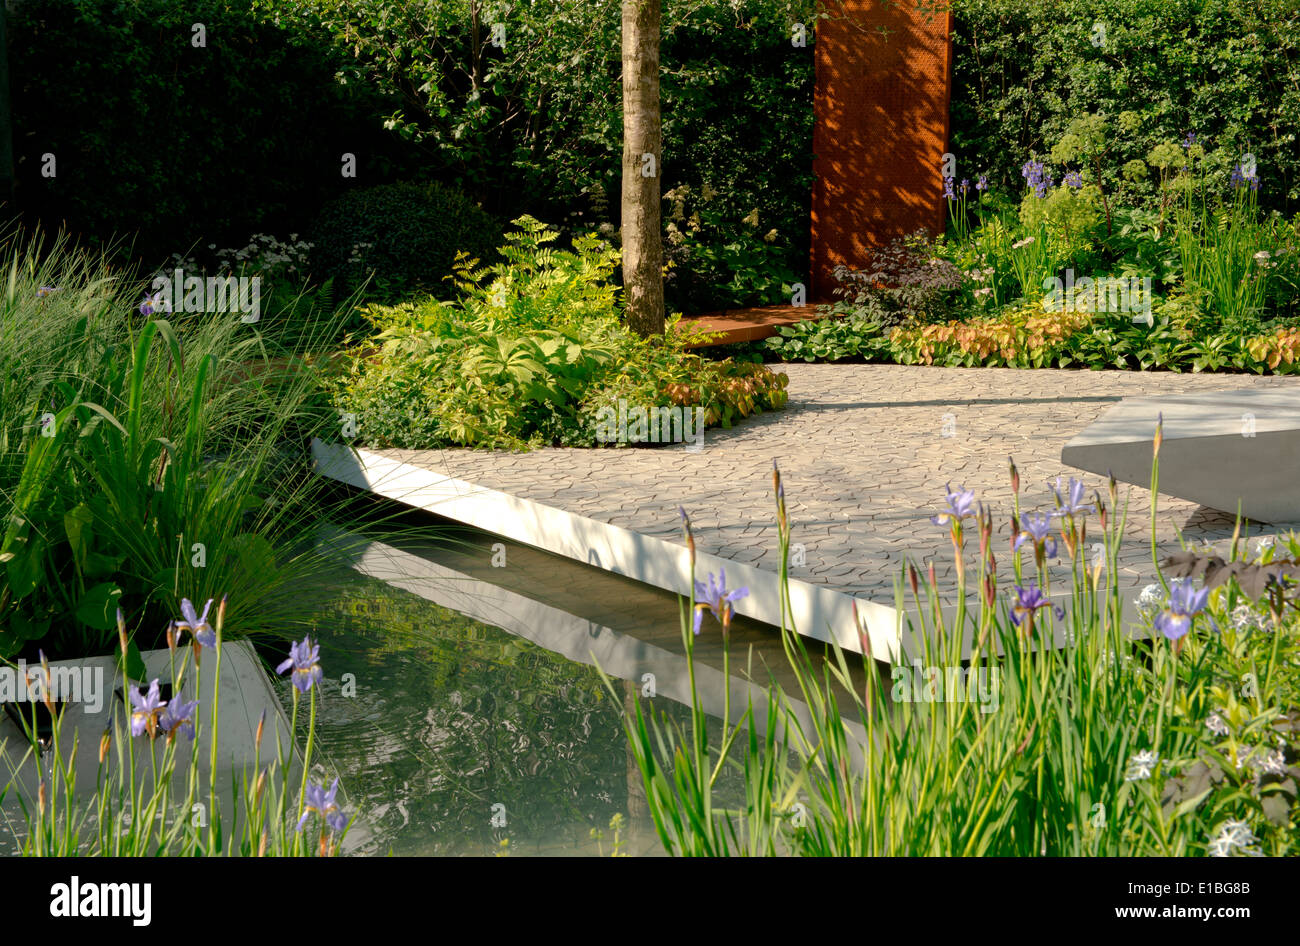 The RBC Waterscape Garden a gold medal winner designed by Hugo Bugg at The Chelsea Flower Show 2014 Stock Photo